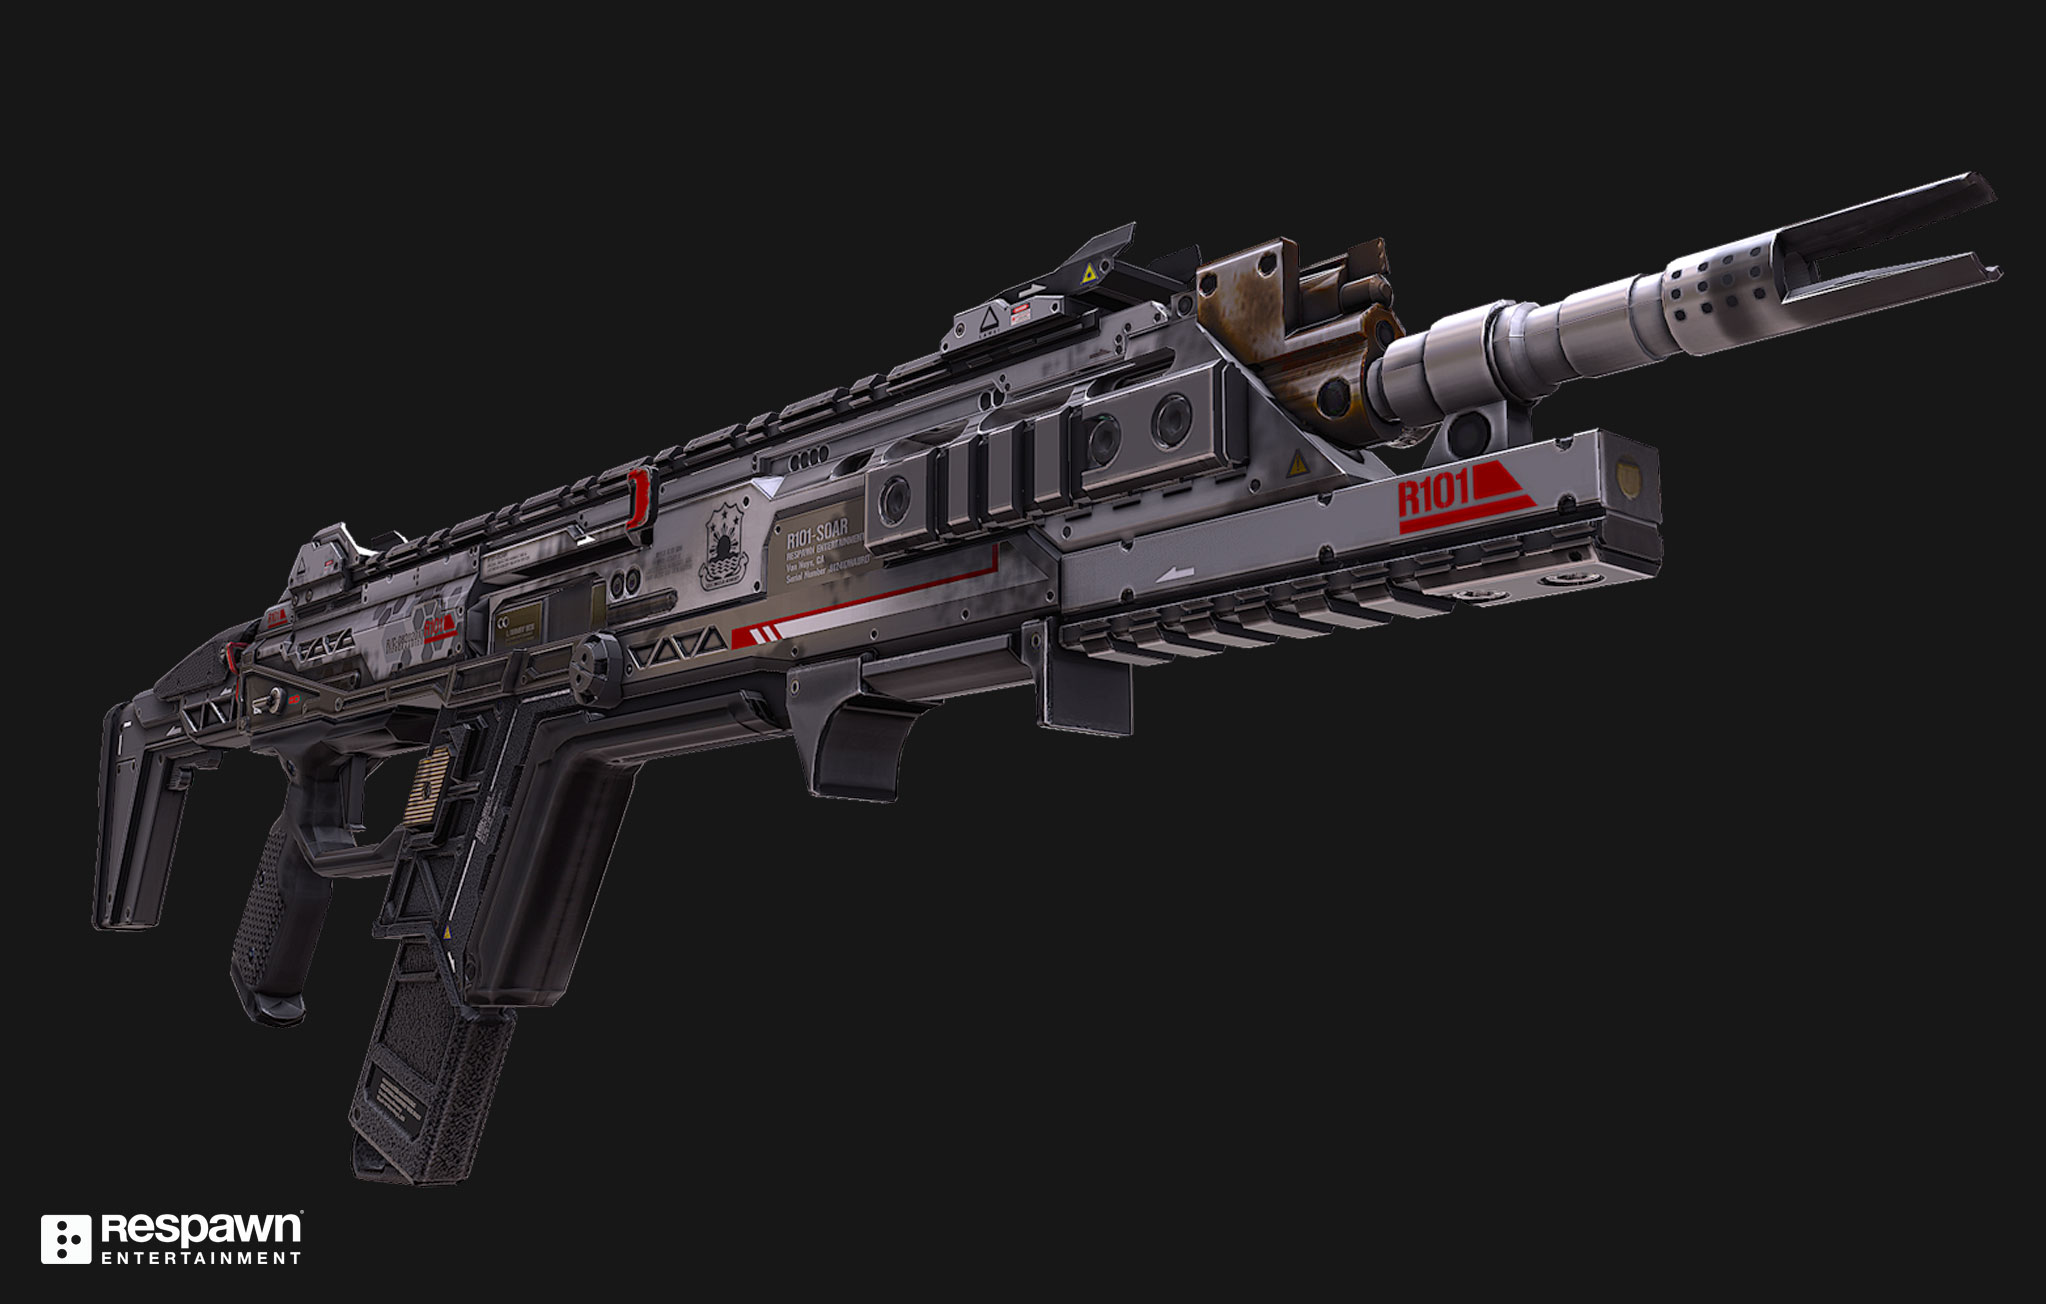 Ryan Lastimosa R1 Assault Rifle Art From Titanfall 2 Completed Around 16 The 1 Was A Good Base For Its Successor The R301 Carbine Which Is A Highly Balanced Medium Ranged Weapon Available In Apex Legends Check Out More